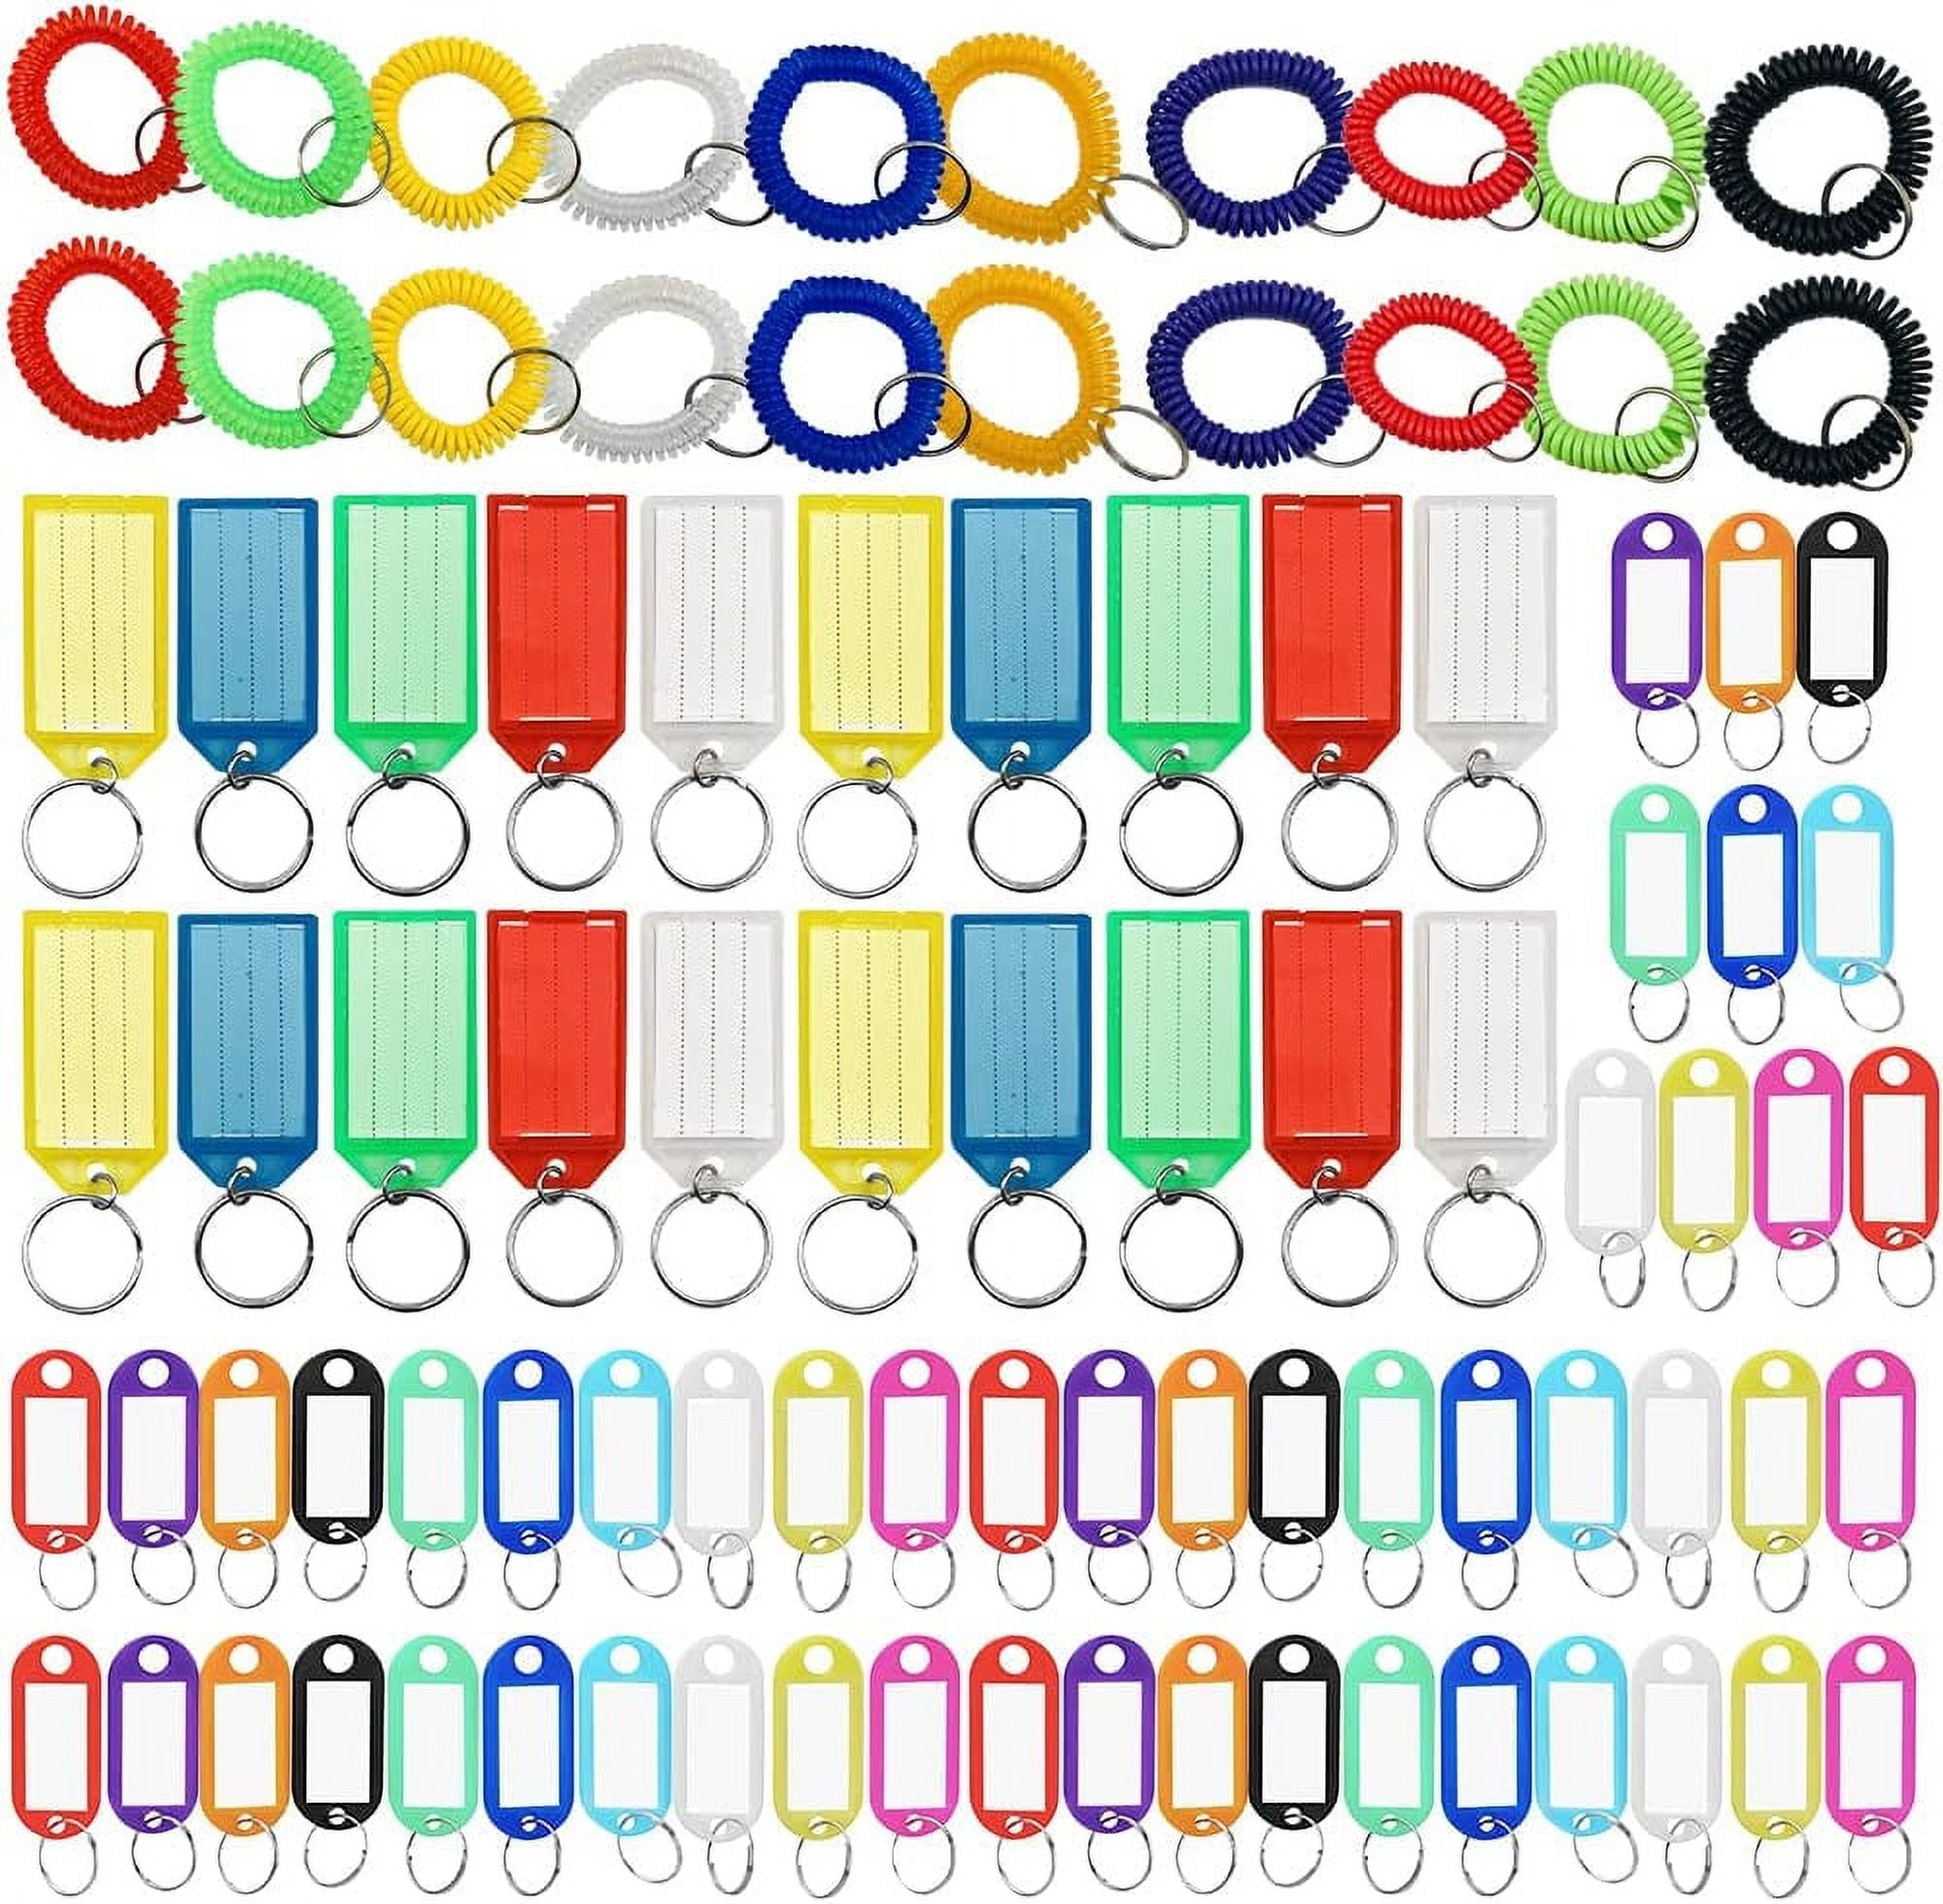 Pack of 90 Wrist Coil Keychains and Tough Plastic Key Tags, DaKuan 20  Stretchable Plastic Wrist Keychains and 70 Key Tags with Labels, for  Identification and Prevention of Keys Falling off 